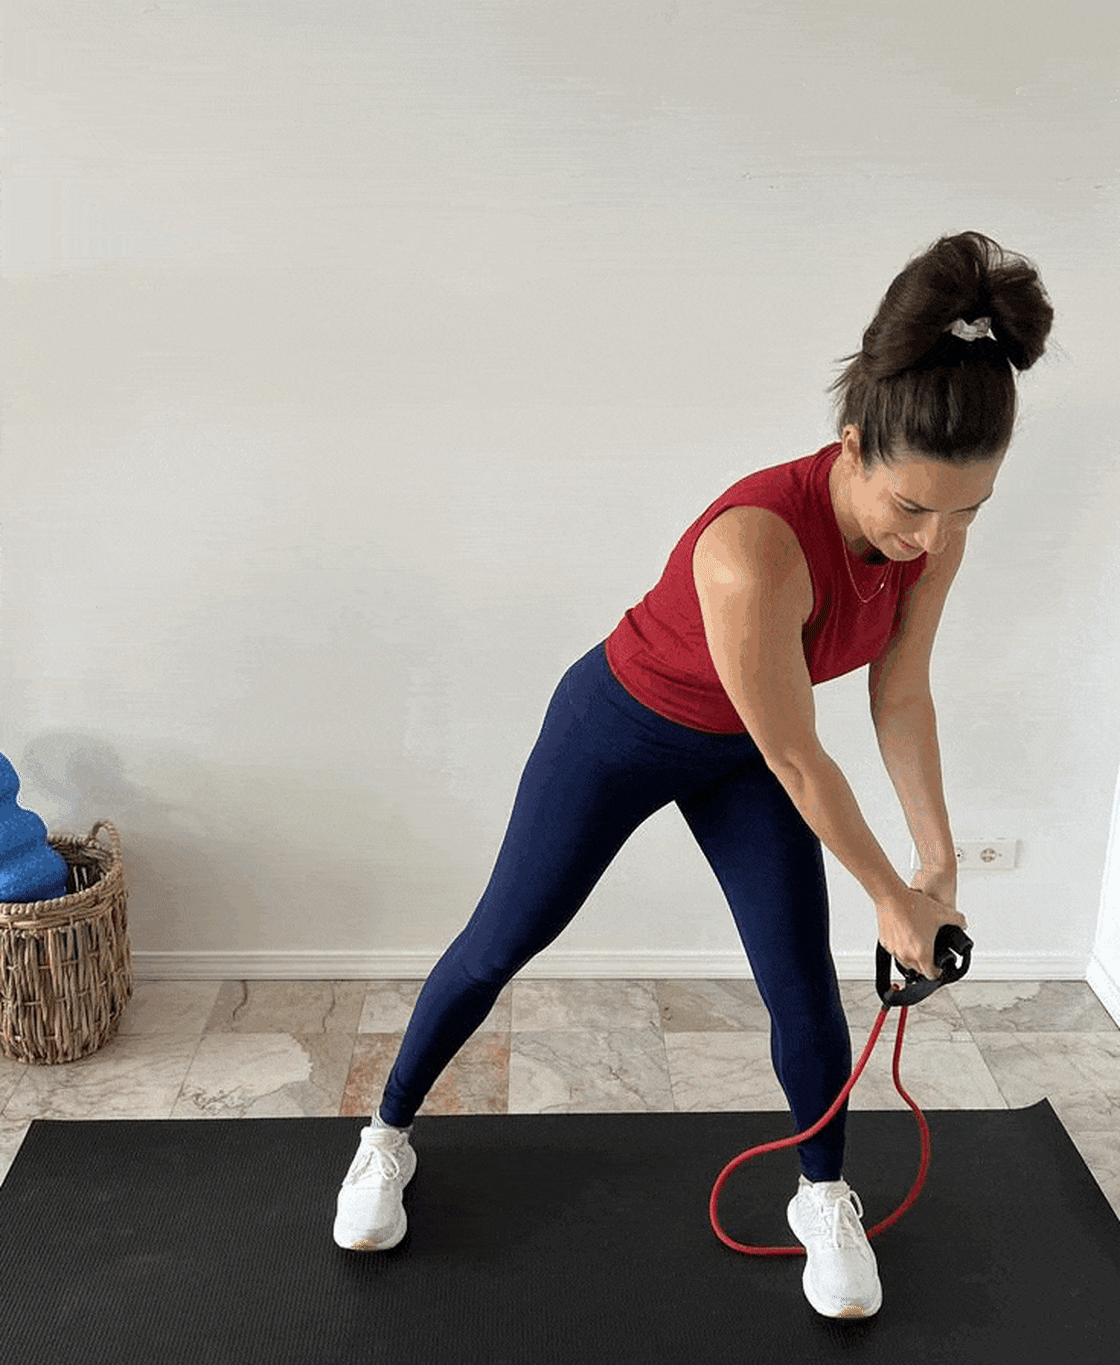 15 Resistance Band Exercises for a Full Body Workout - Steel